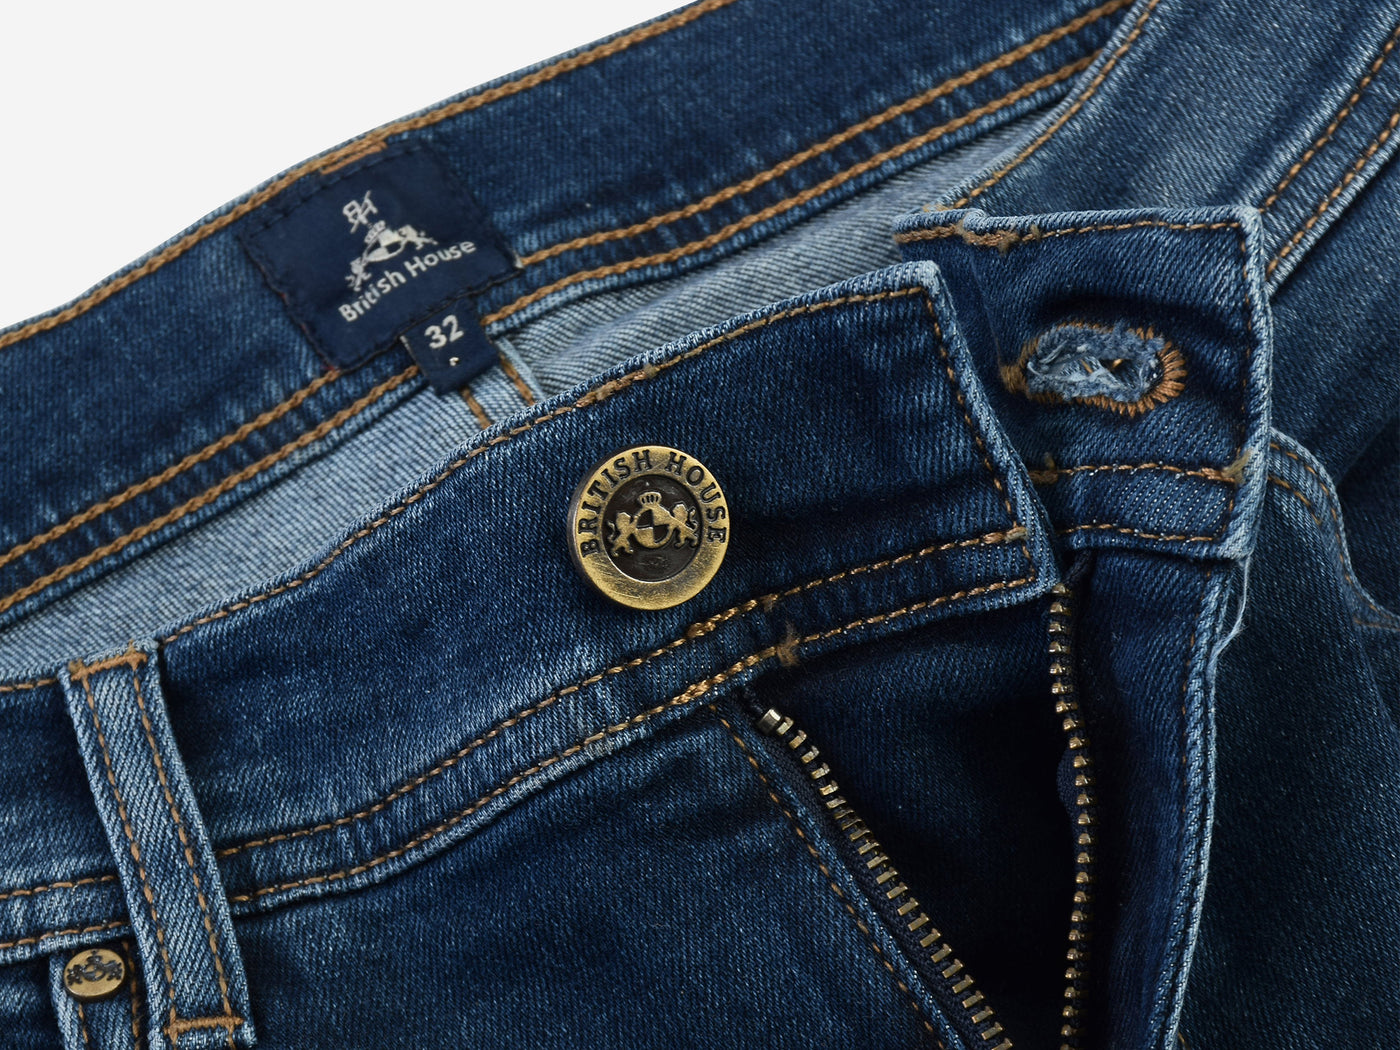 Contemporary-fit Jeans in Mid-Blue Denim